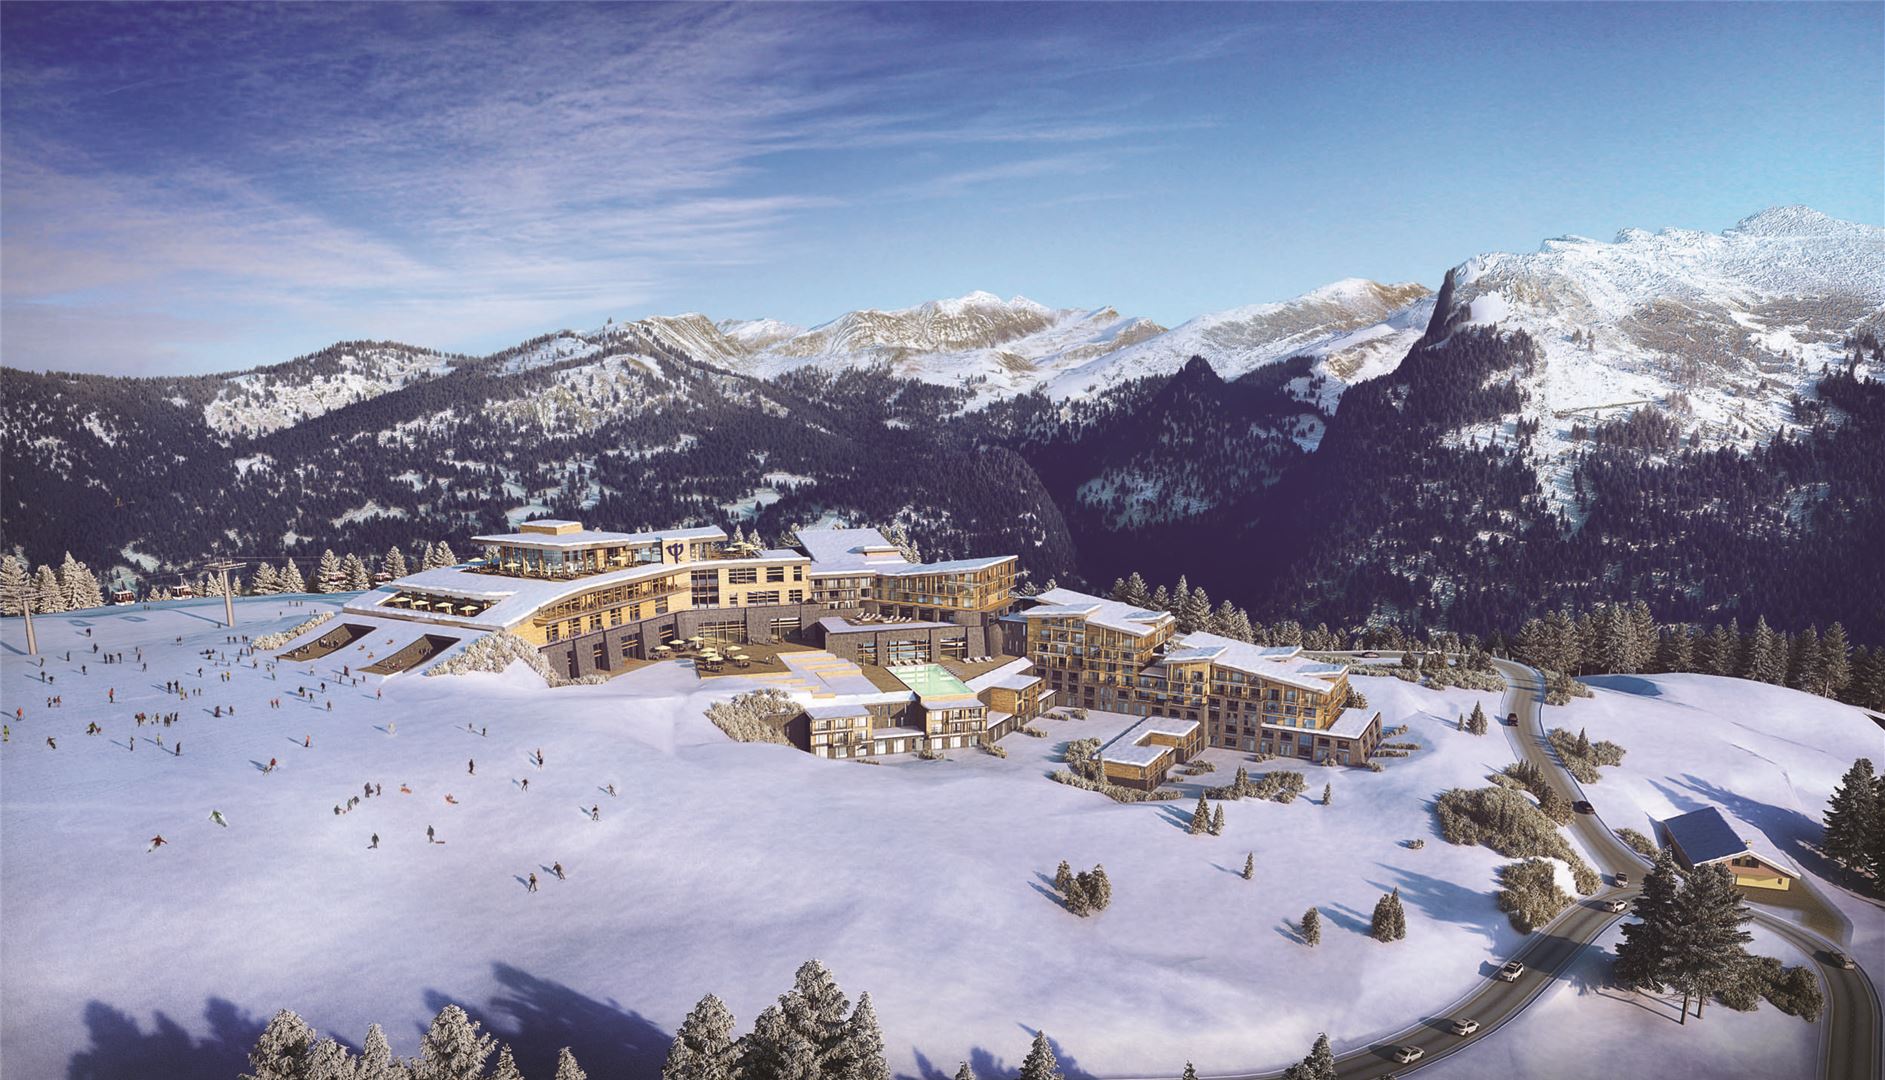 Club Med’s Evolution: A New Focus on Families and Ski Resorts